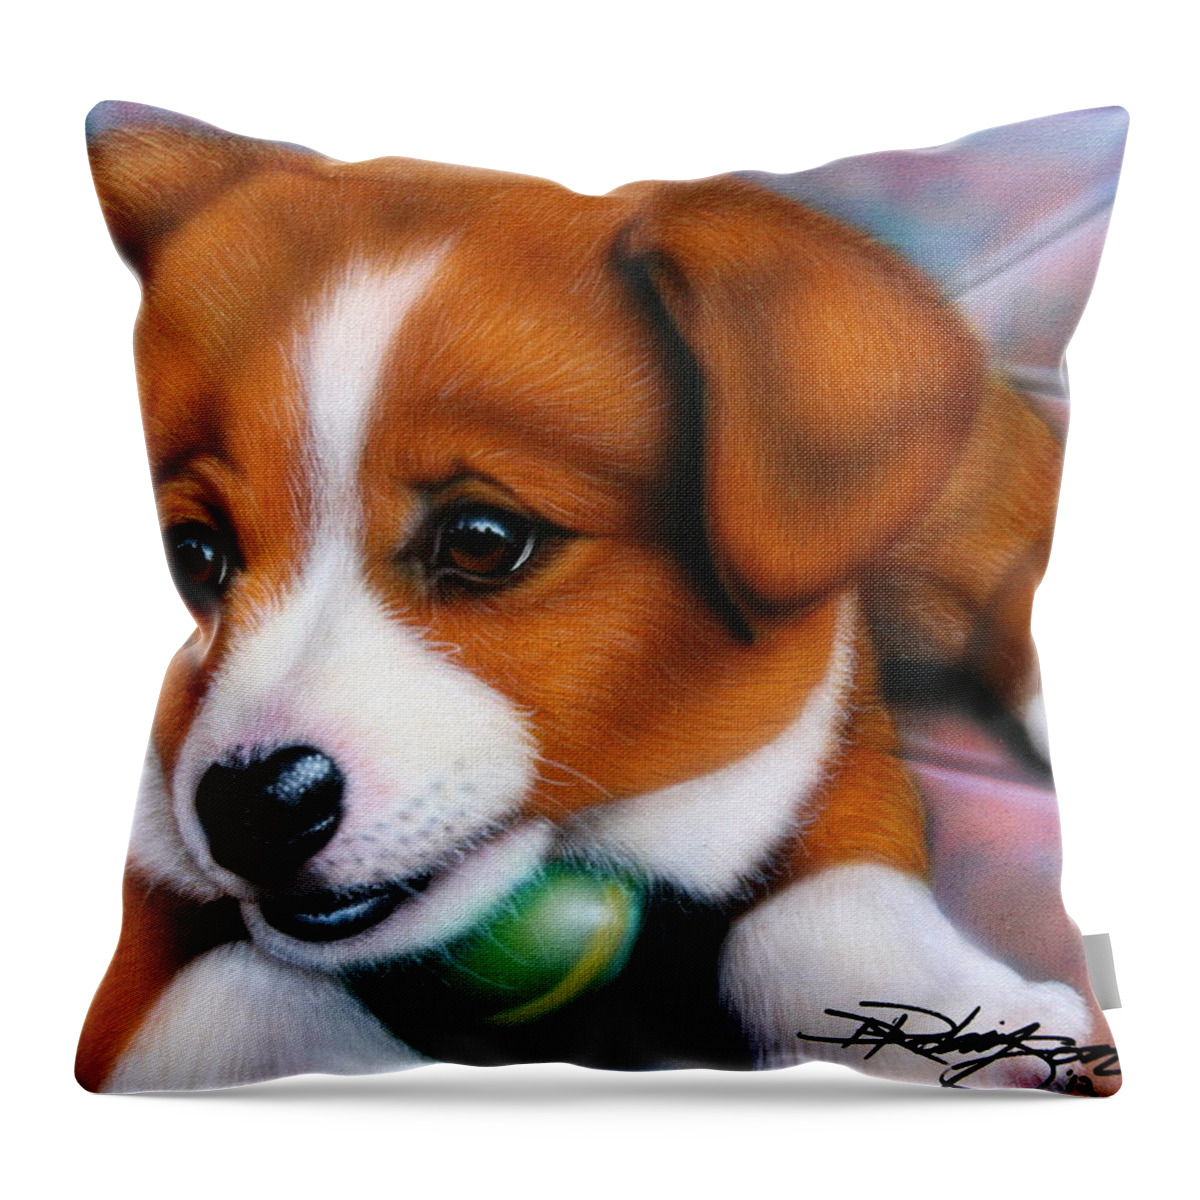 Squeaker Throw Pillow featuring the painting Squeaker by Darren Robinson